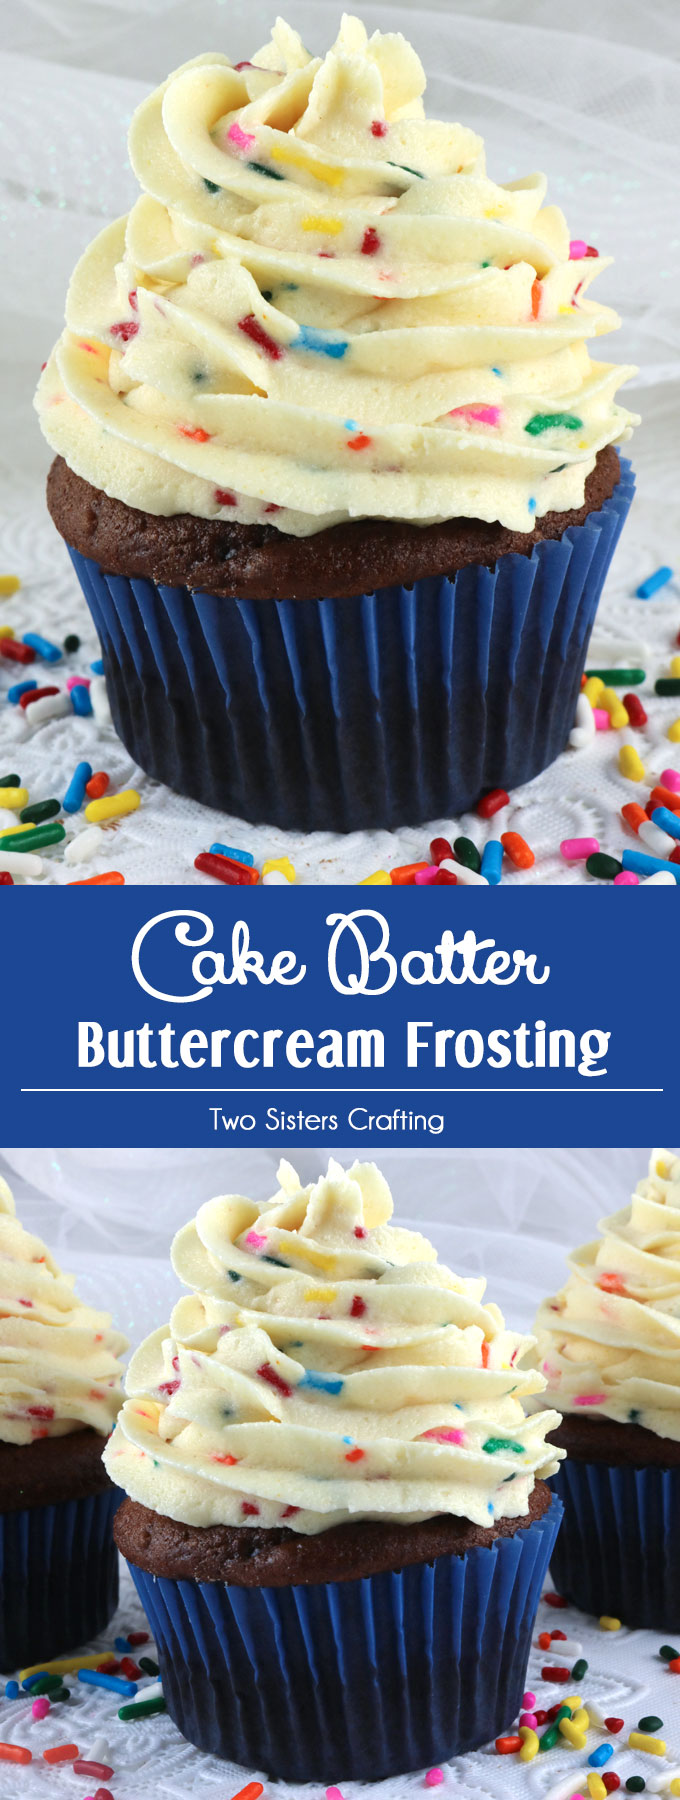 Cake Batter Buttercream Frosting - Two Sisters